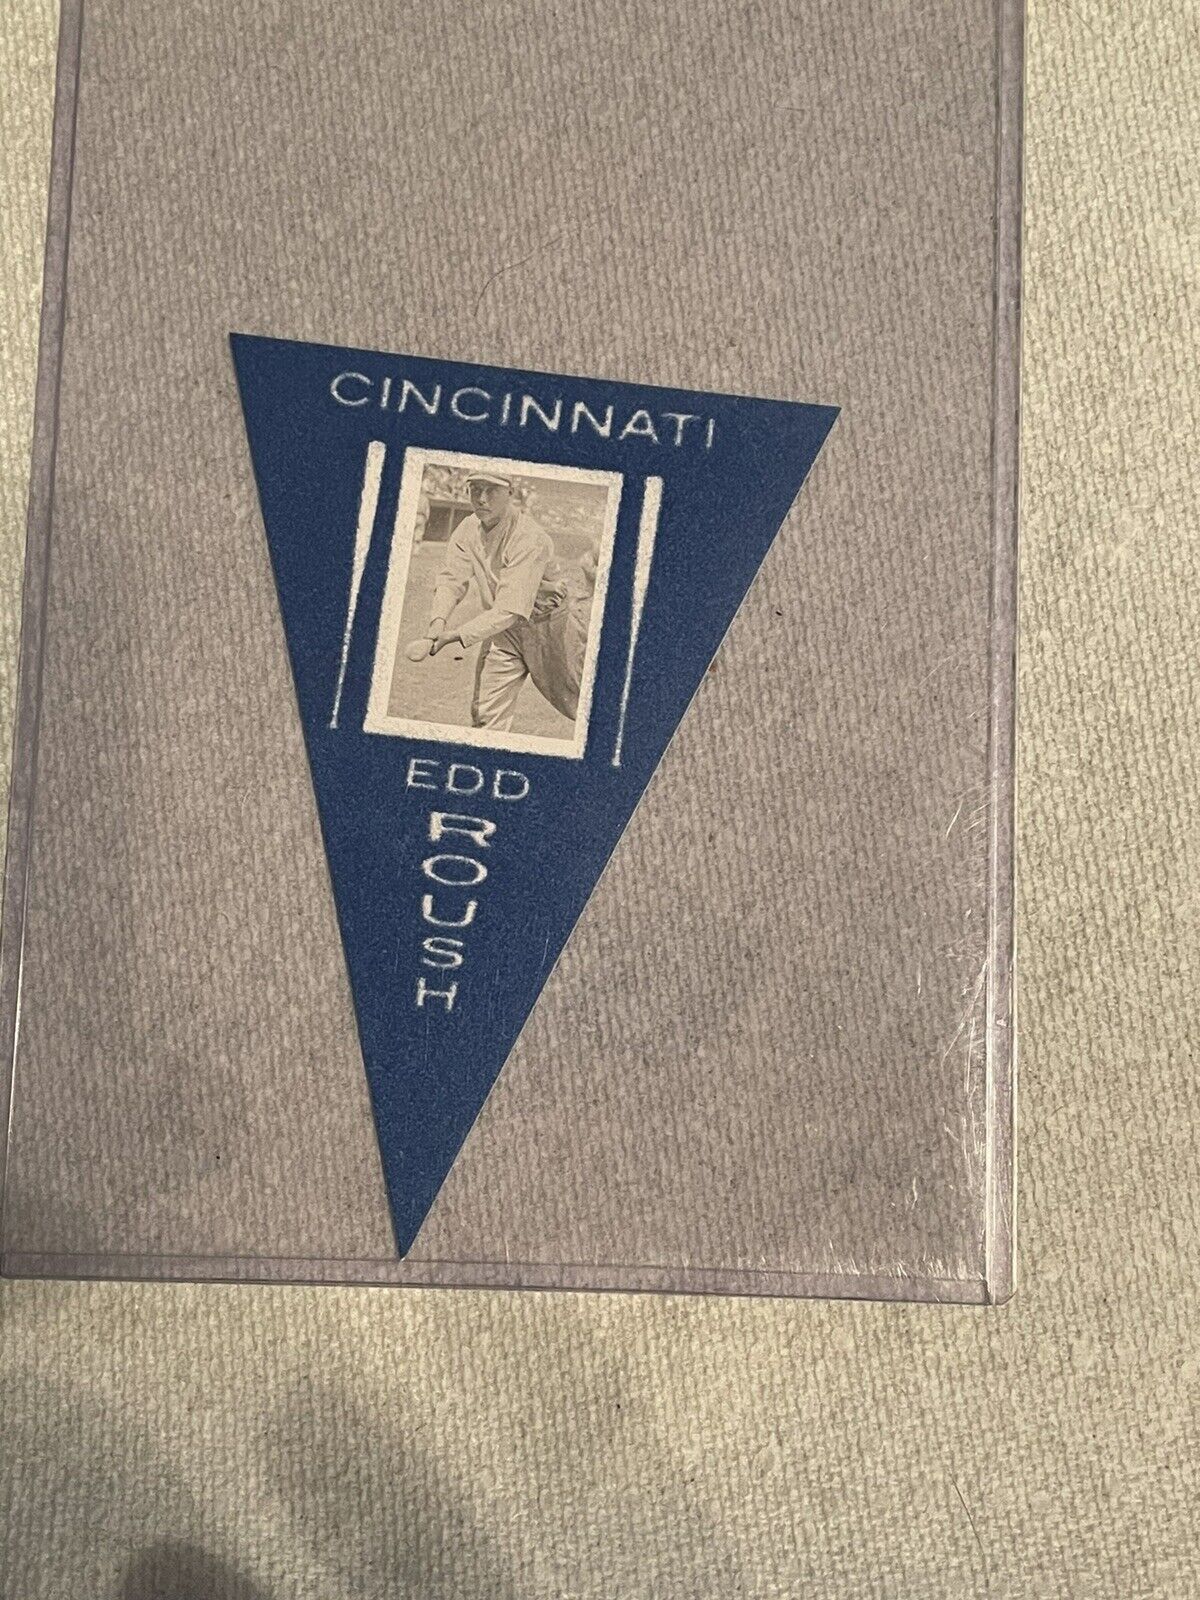 2013 Cooperstown Induction Pennant Edd Roush 1962 Induction